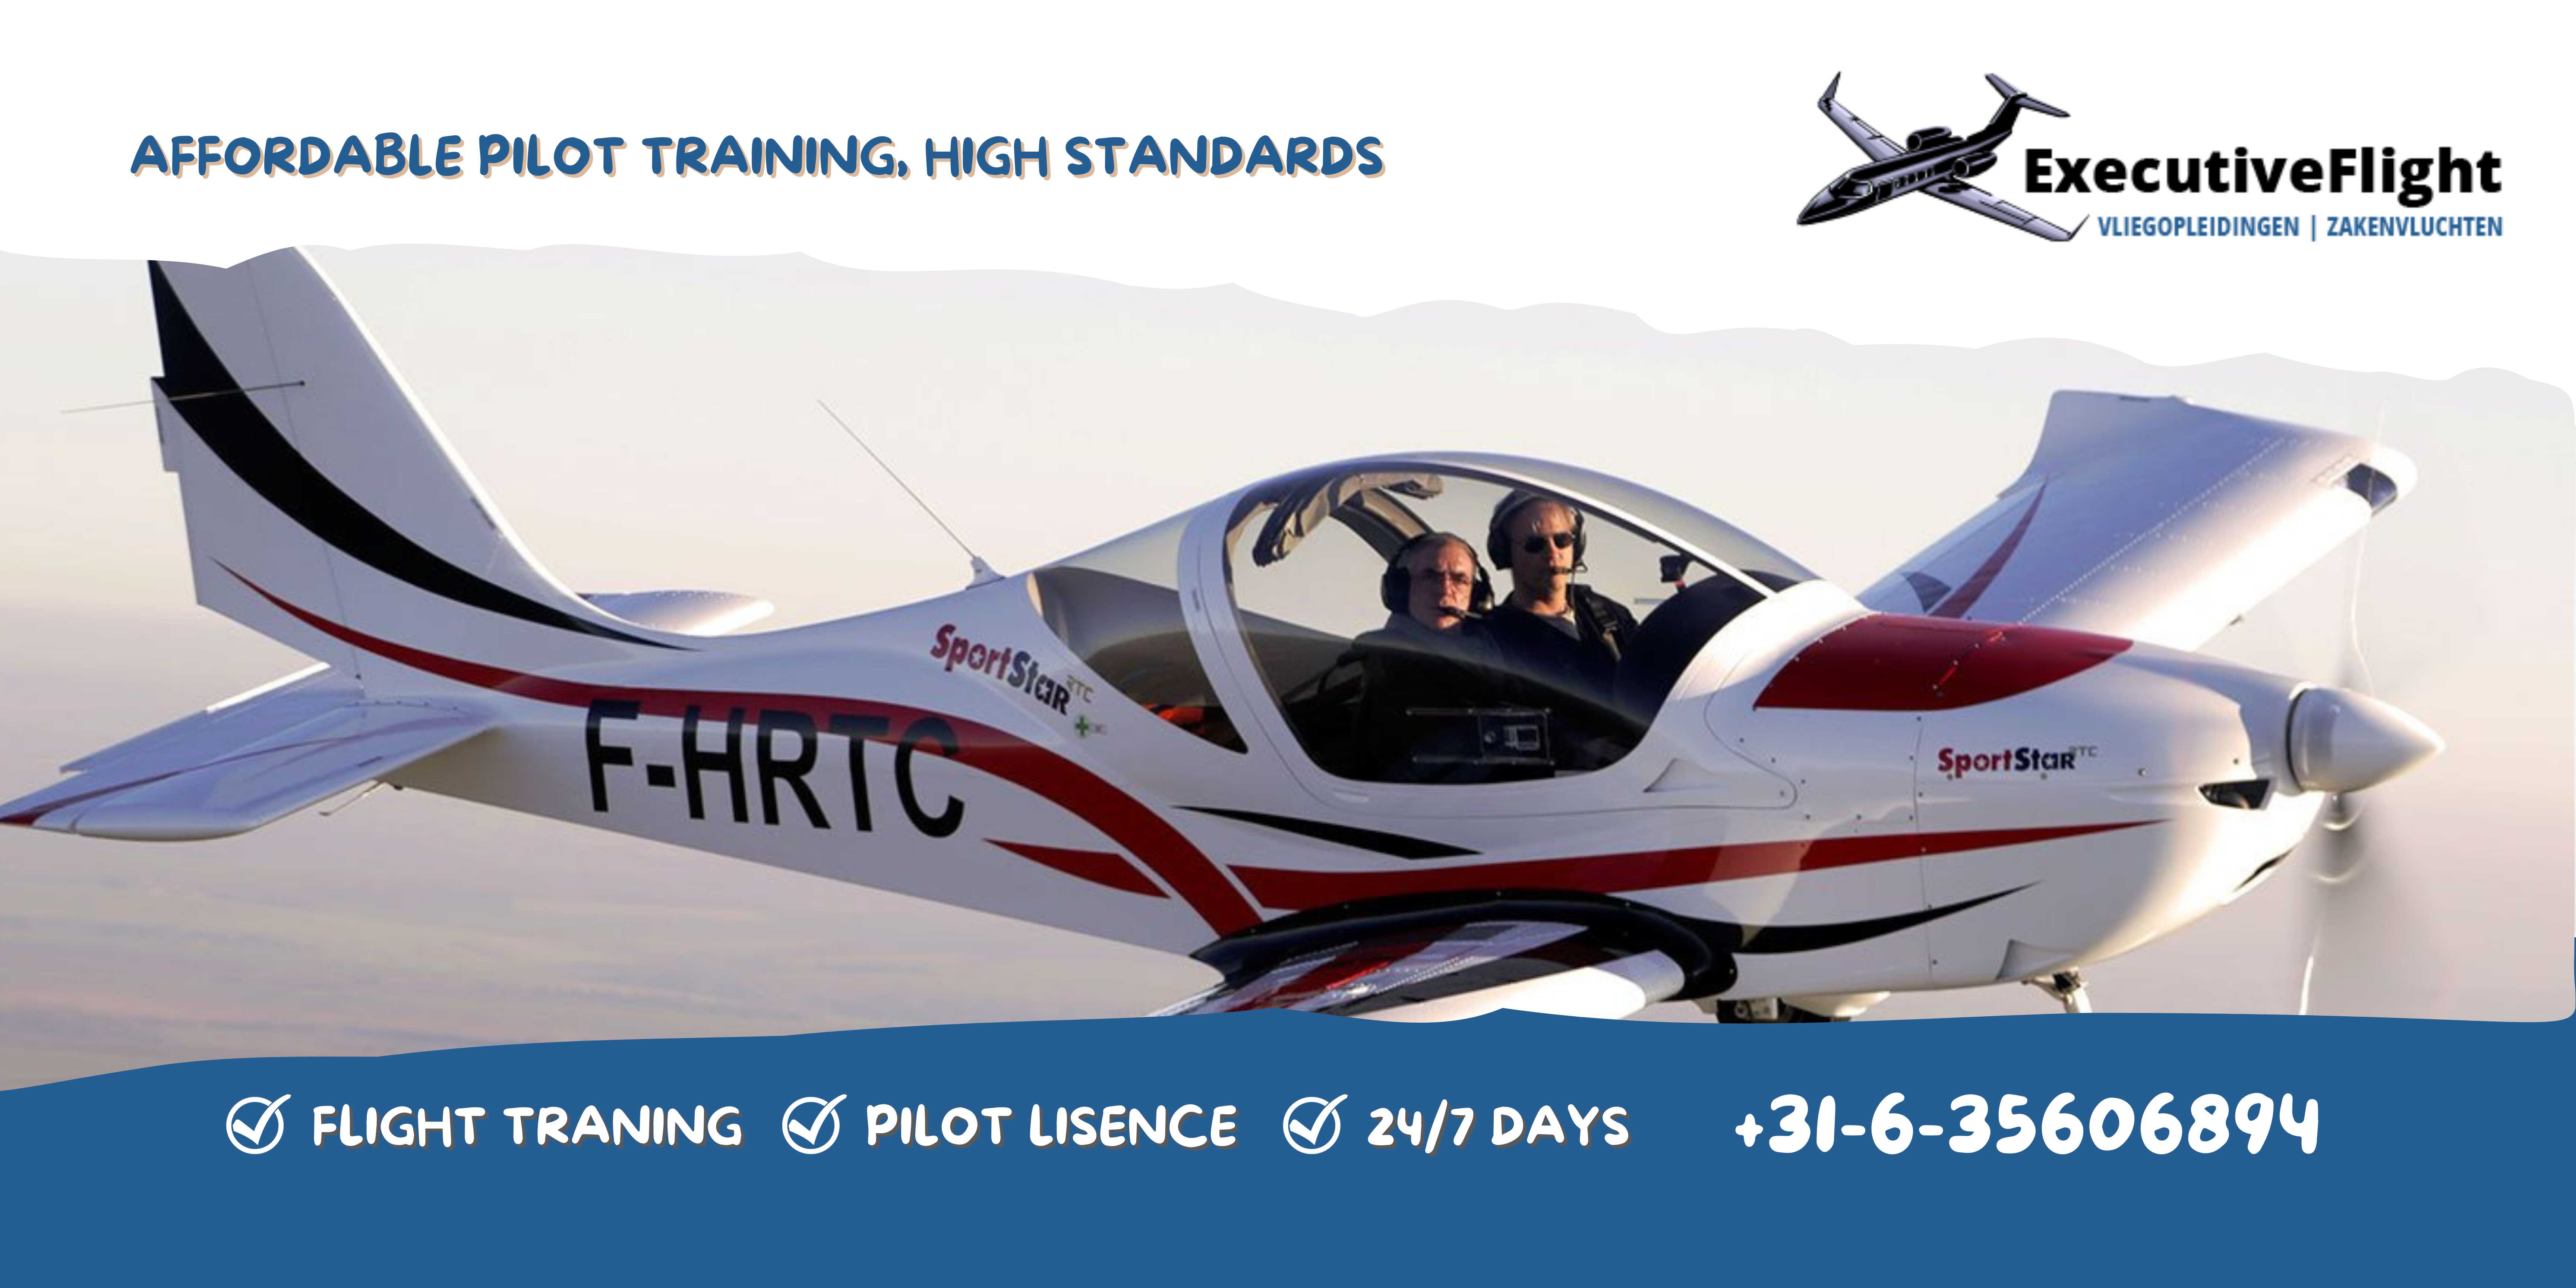  Start Your Journey - Become a Pilot with Executive Flight